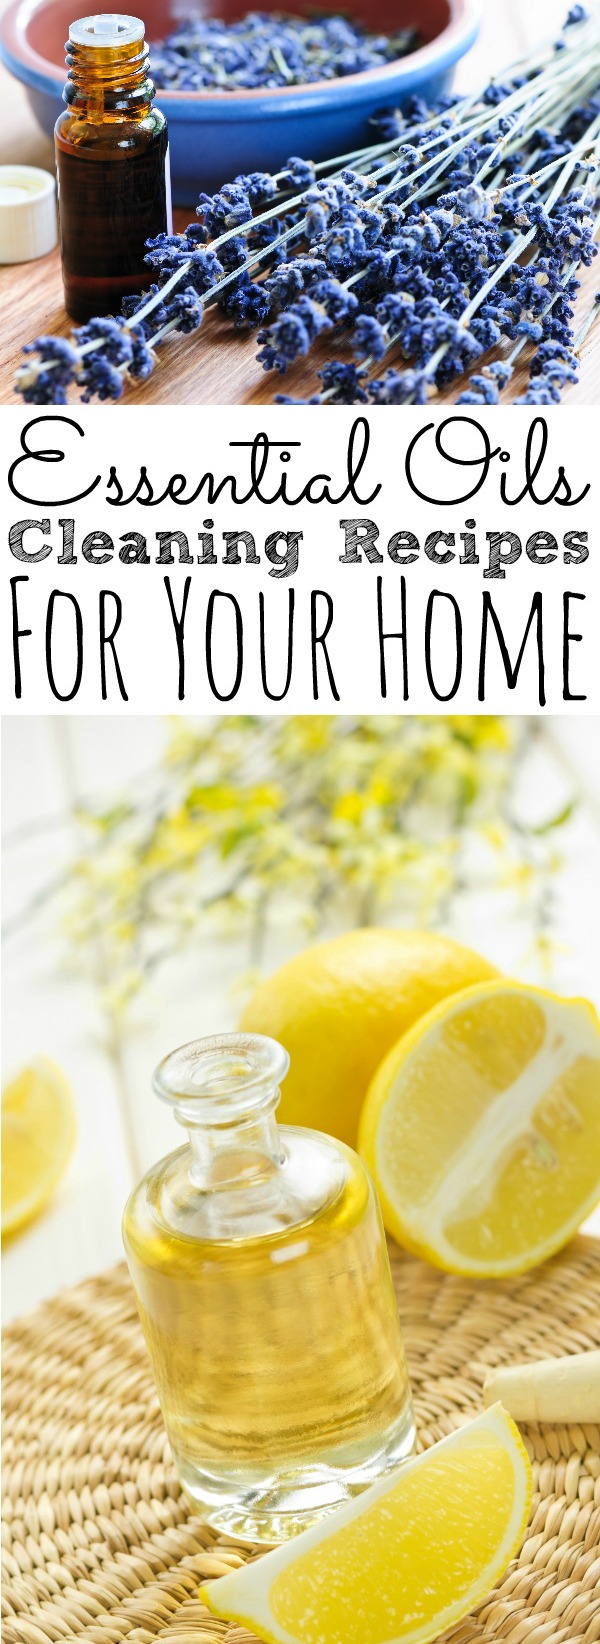 Homemade Cleaning Recipes with Essential Oils